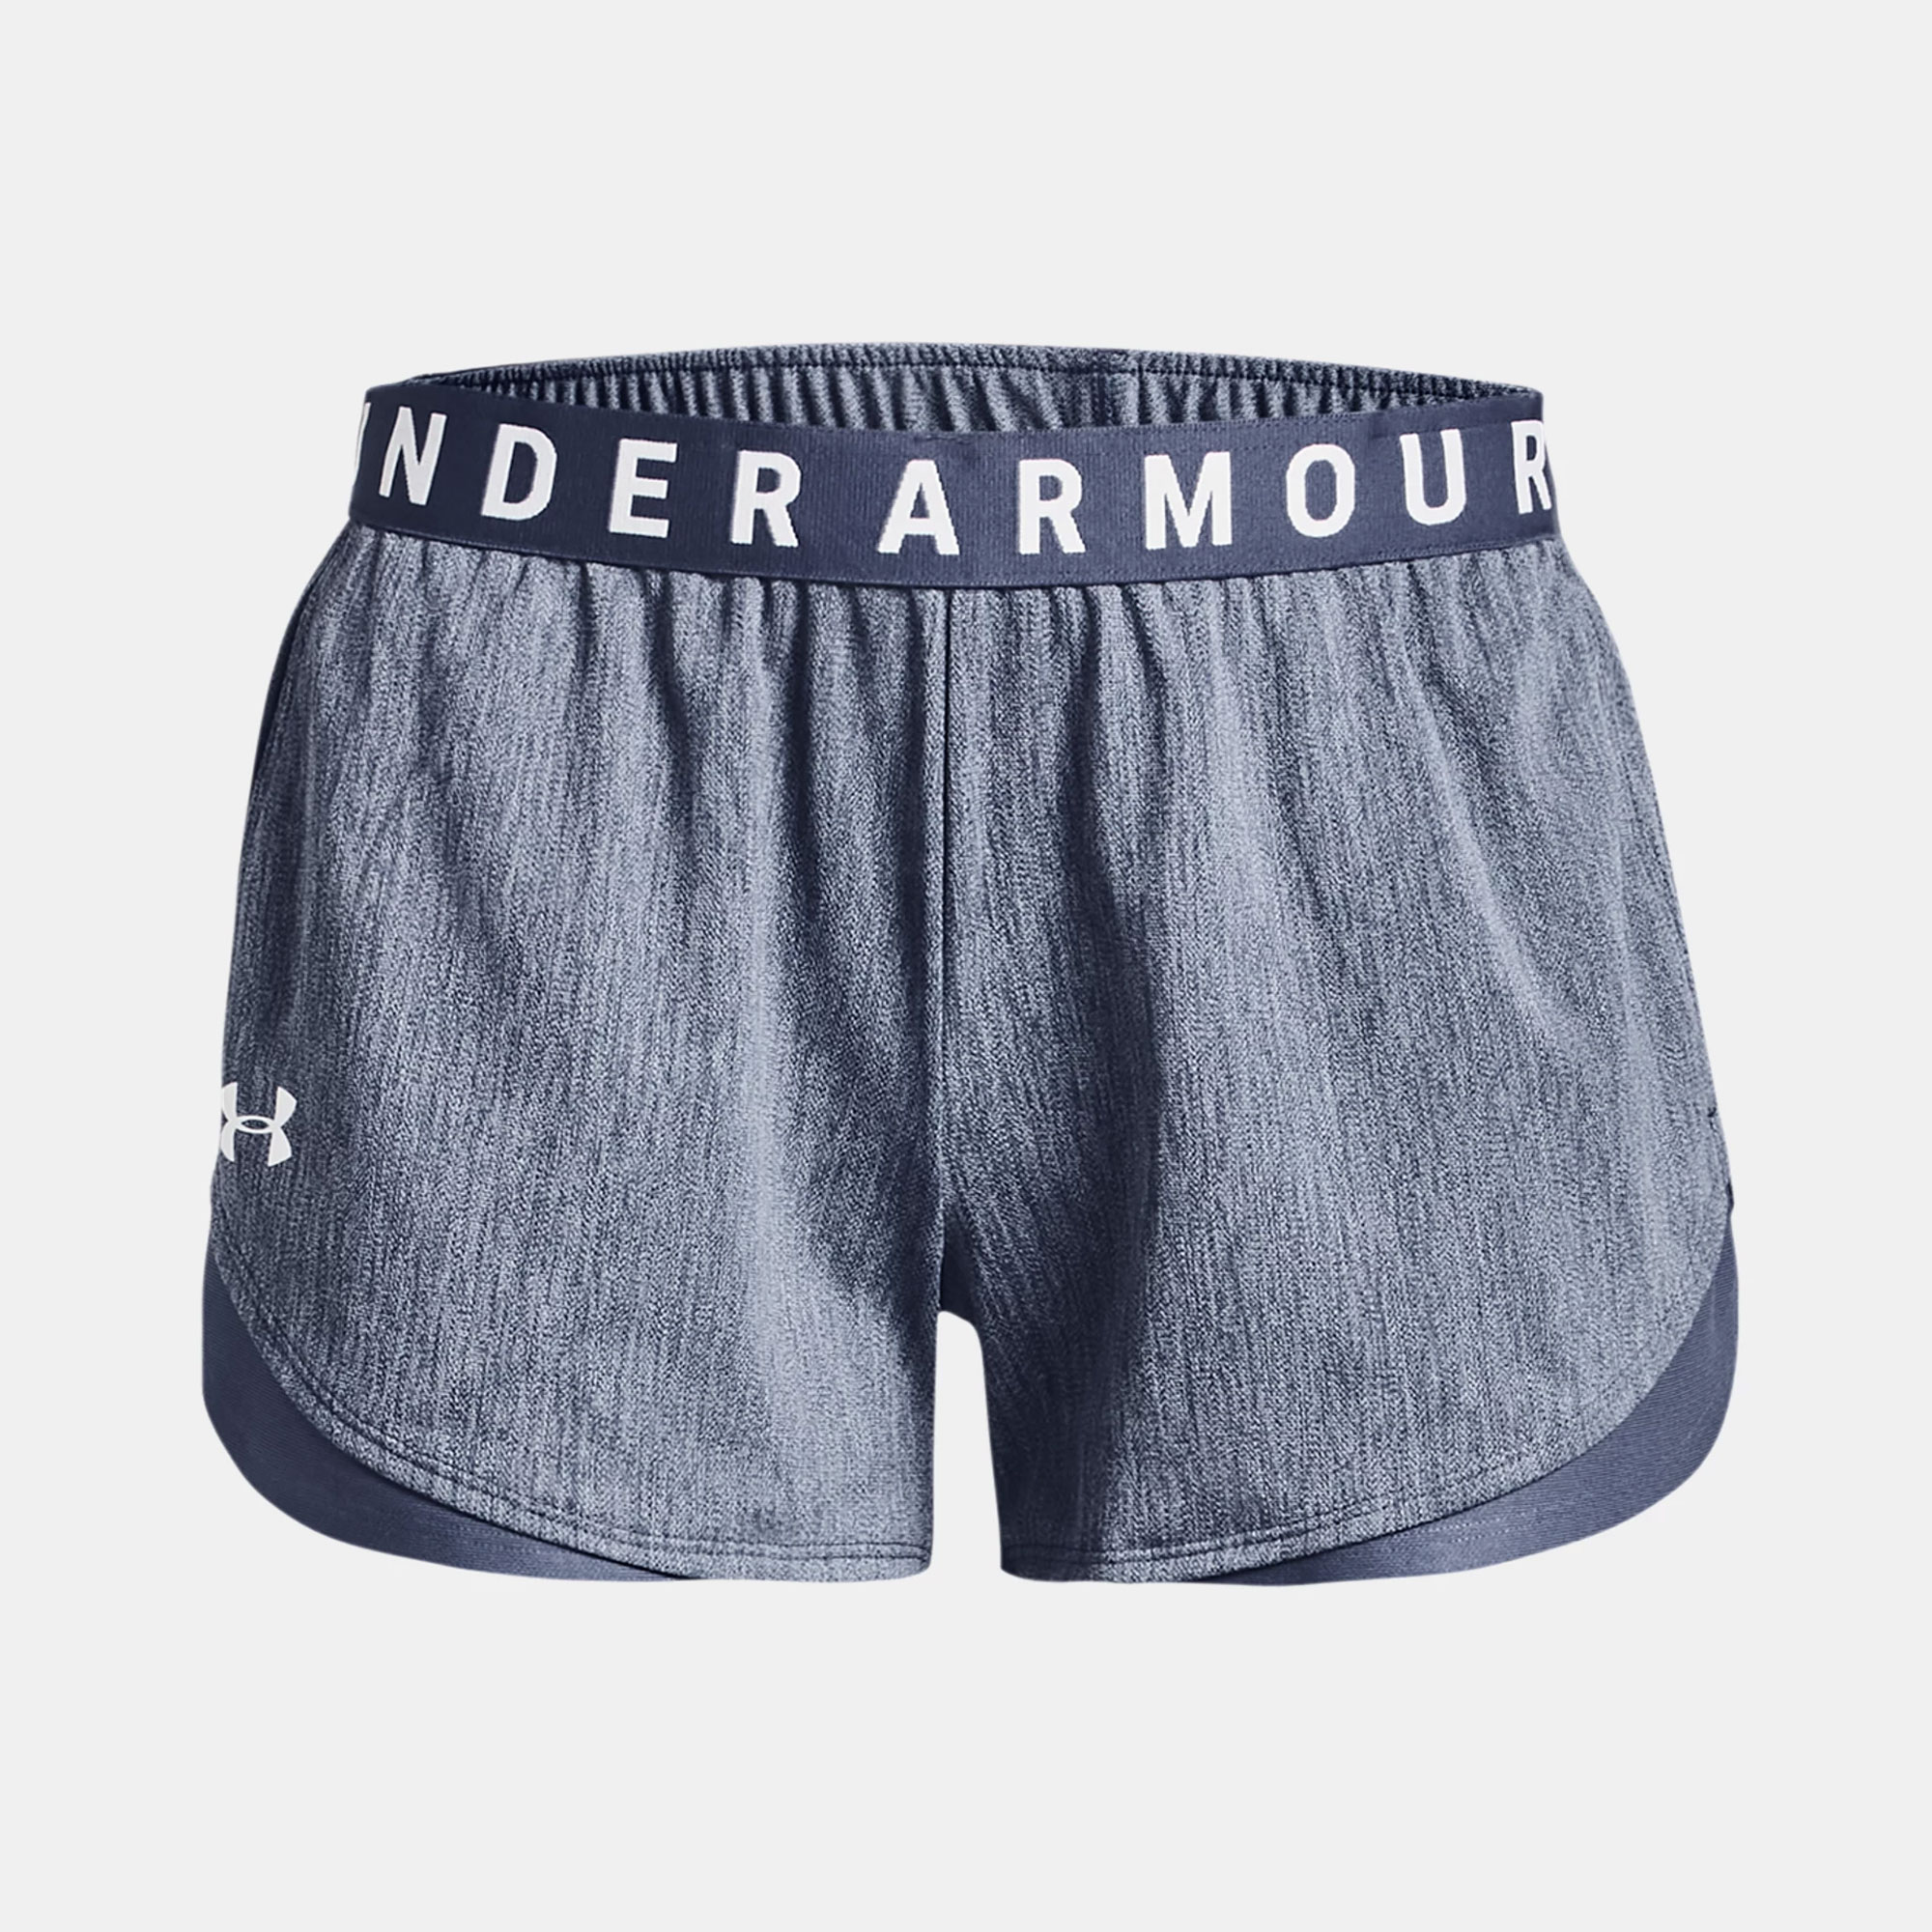 Under Armour Womens's Shorts